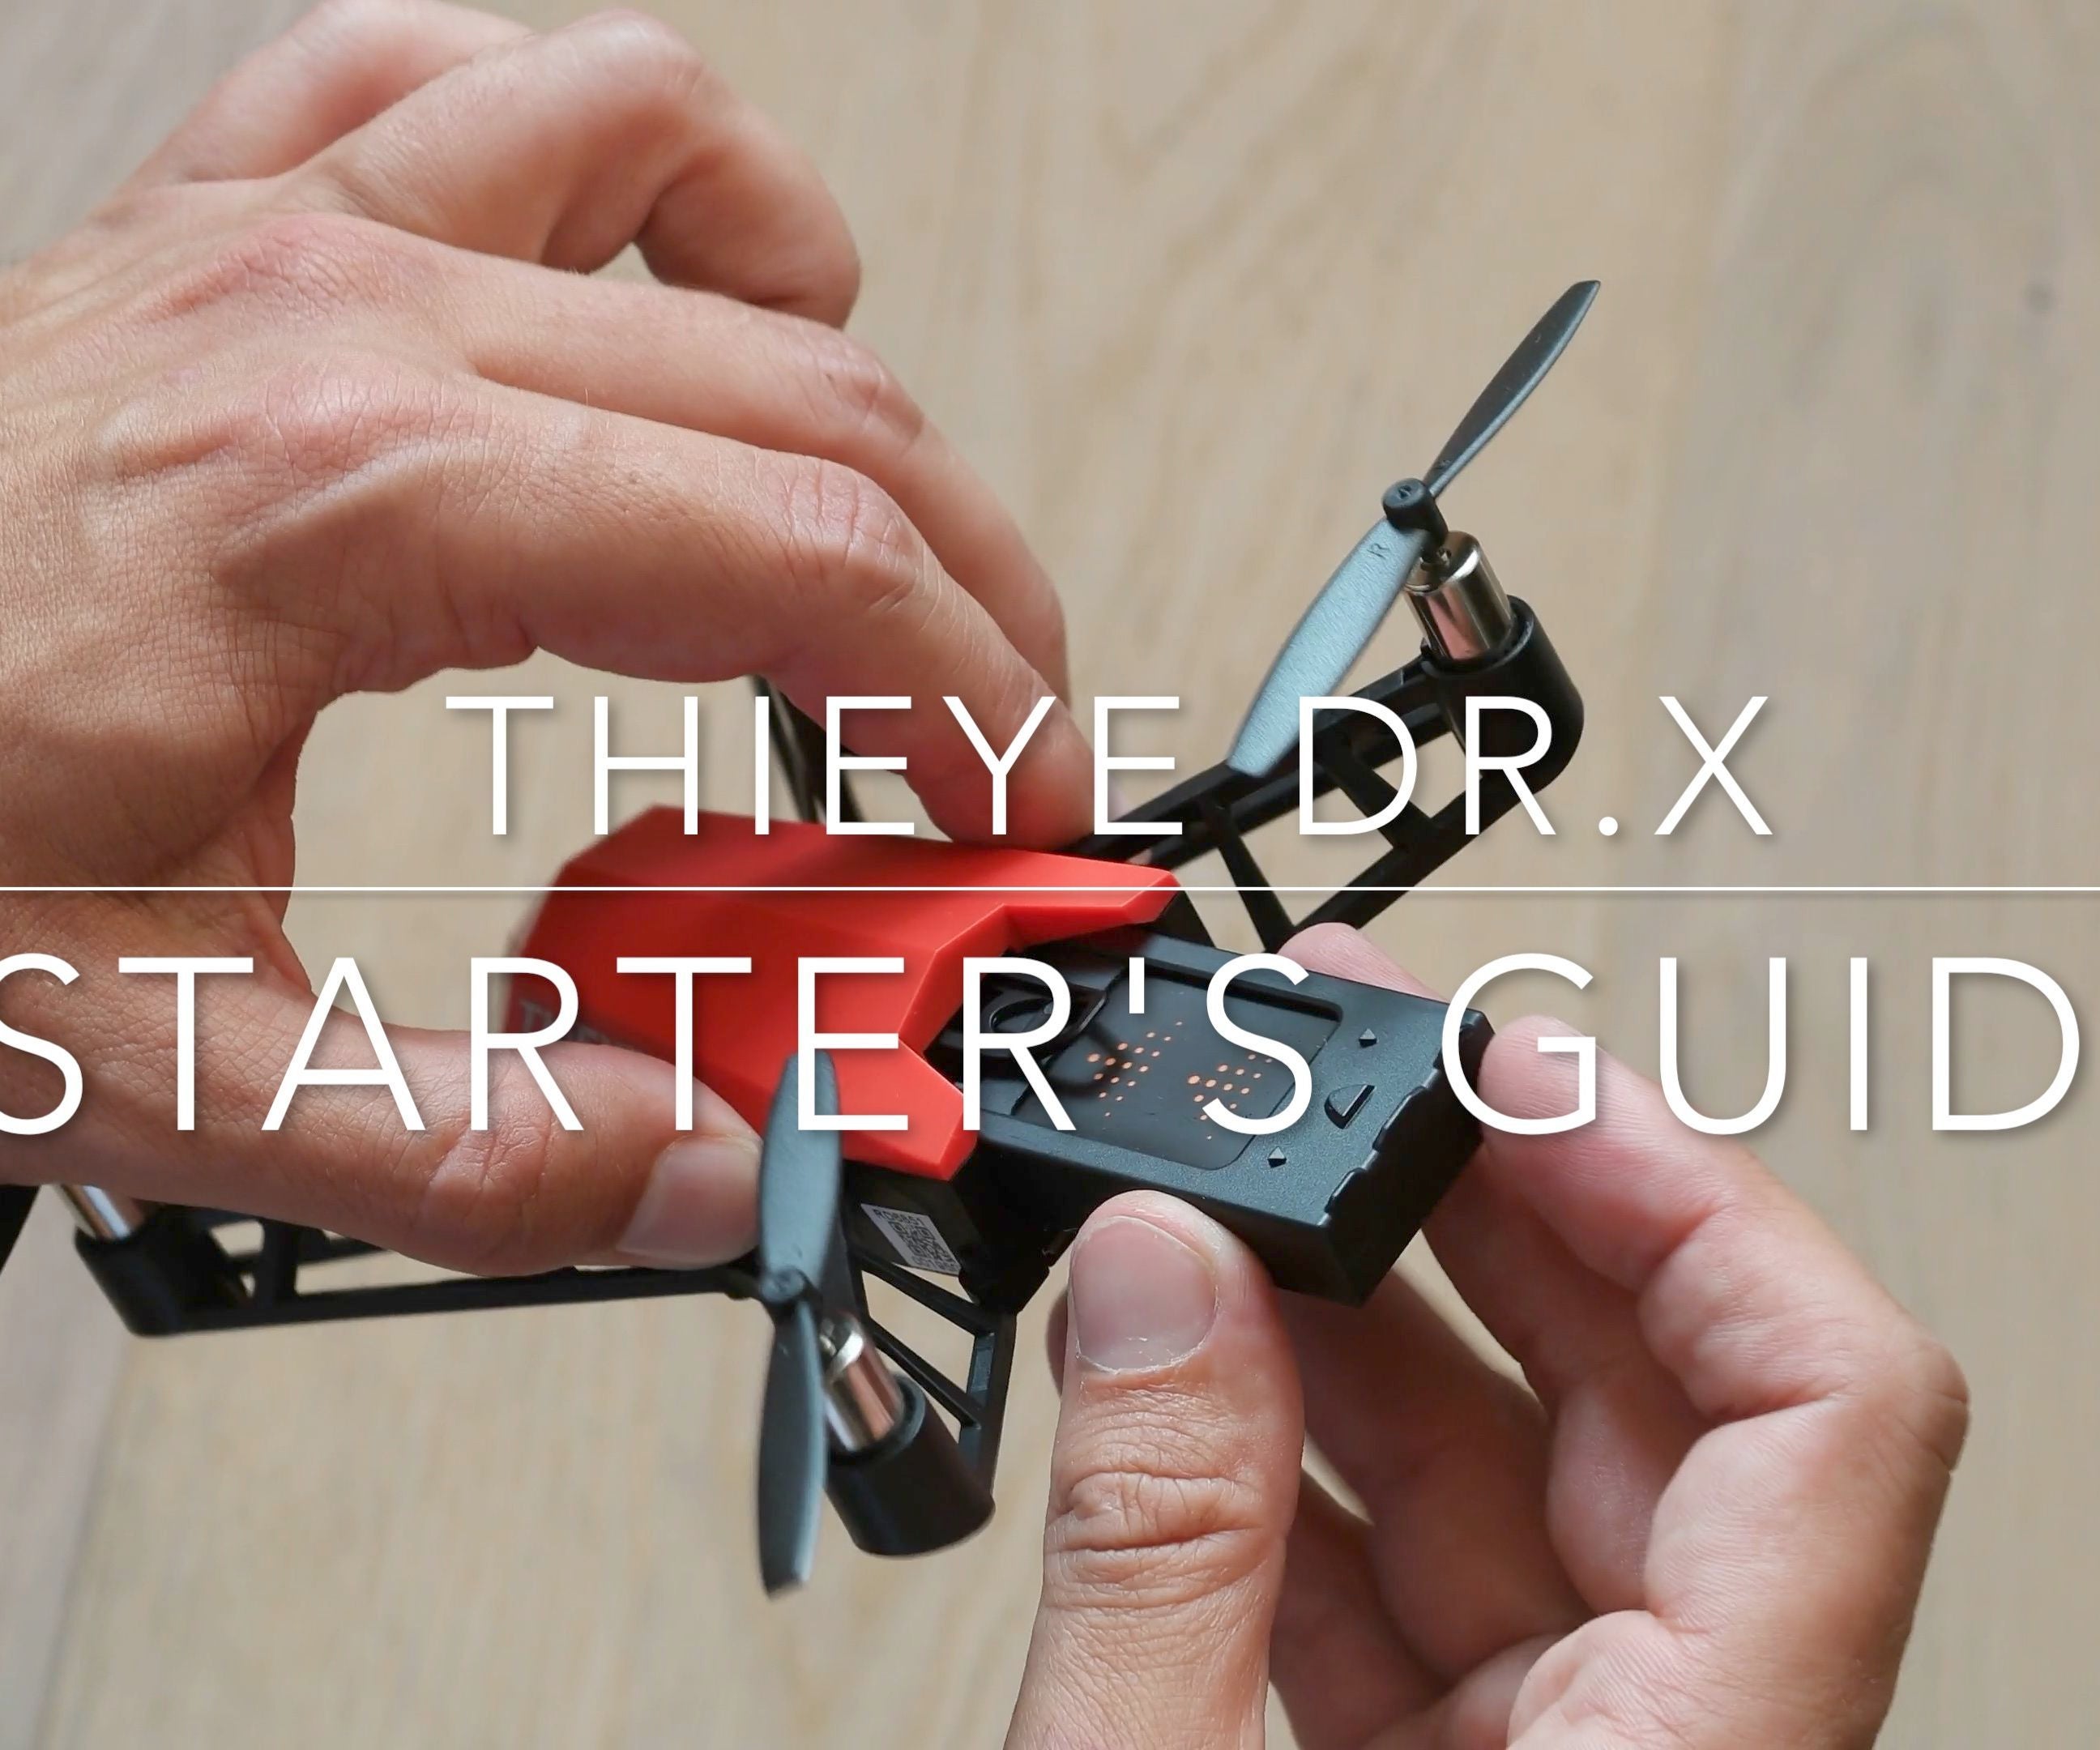 Starter's Guide ThiEye Dr. X